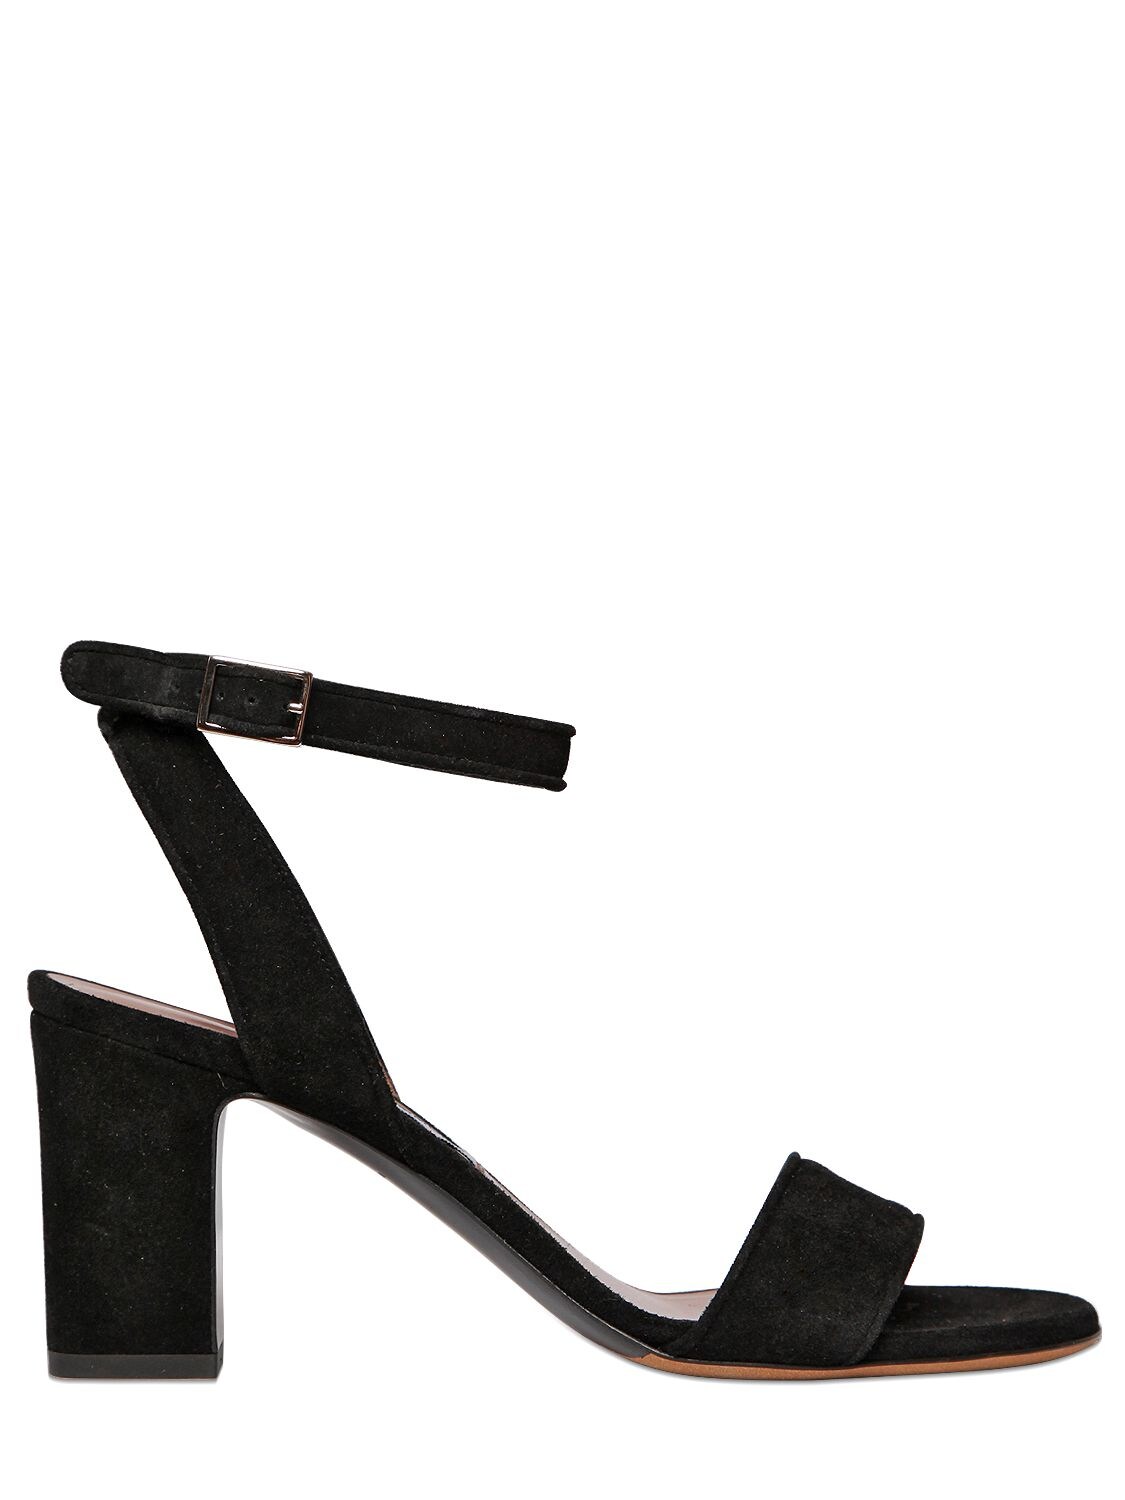 Tabitha Simmons 70mm Leticia Suede Sandals In Black